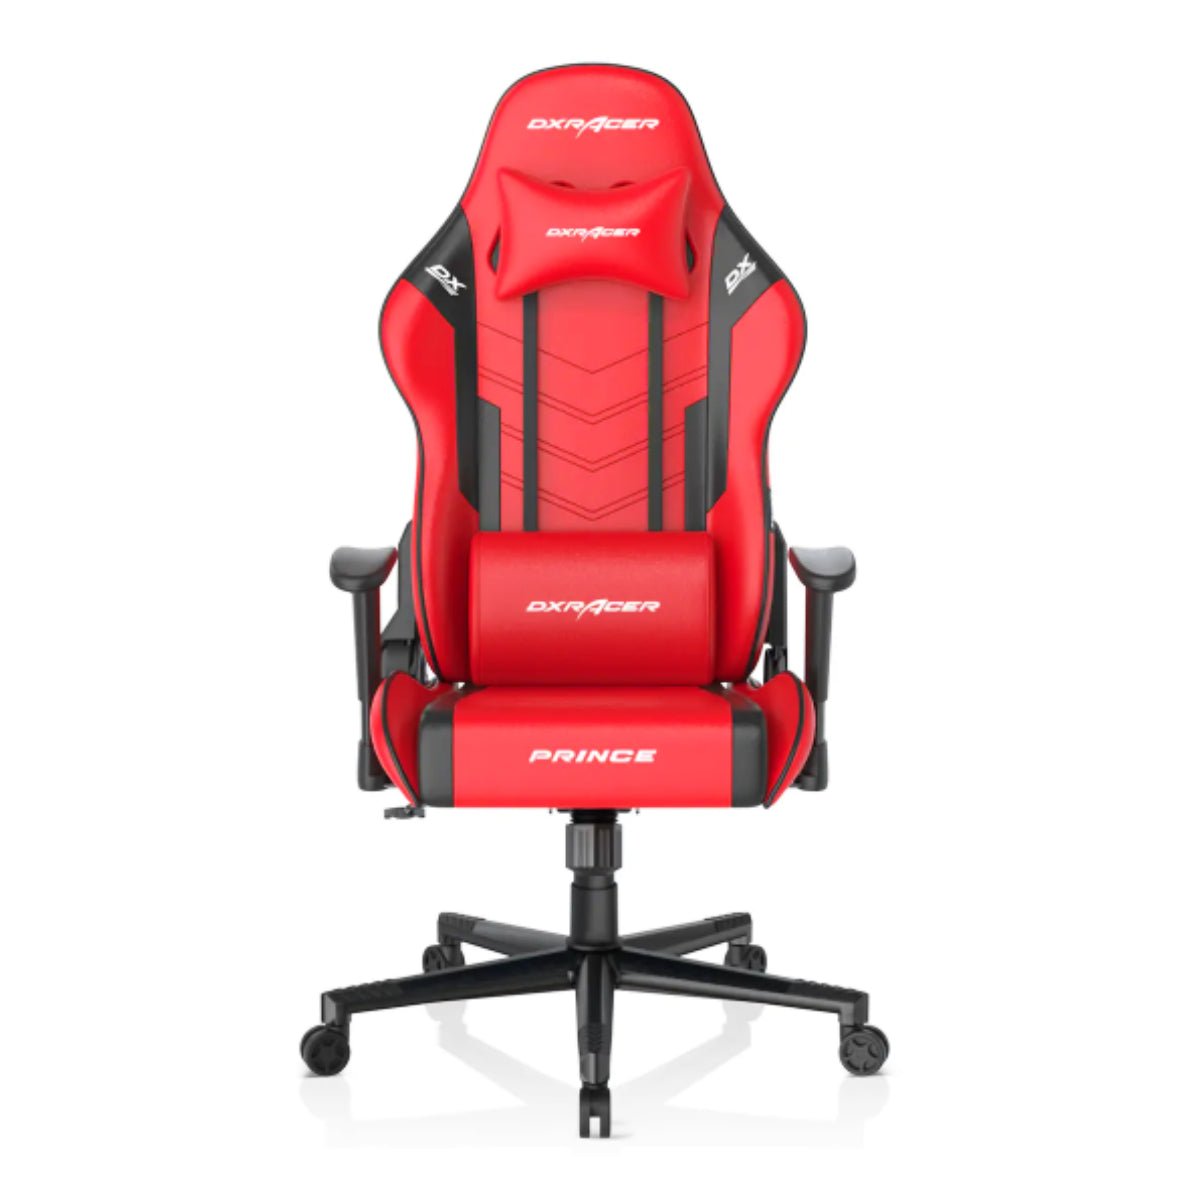 DXRacer P Series Gaming Chair - Red & Black - Store 974 | ستور ٩٧٤